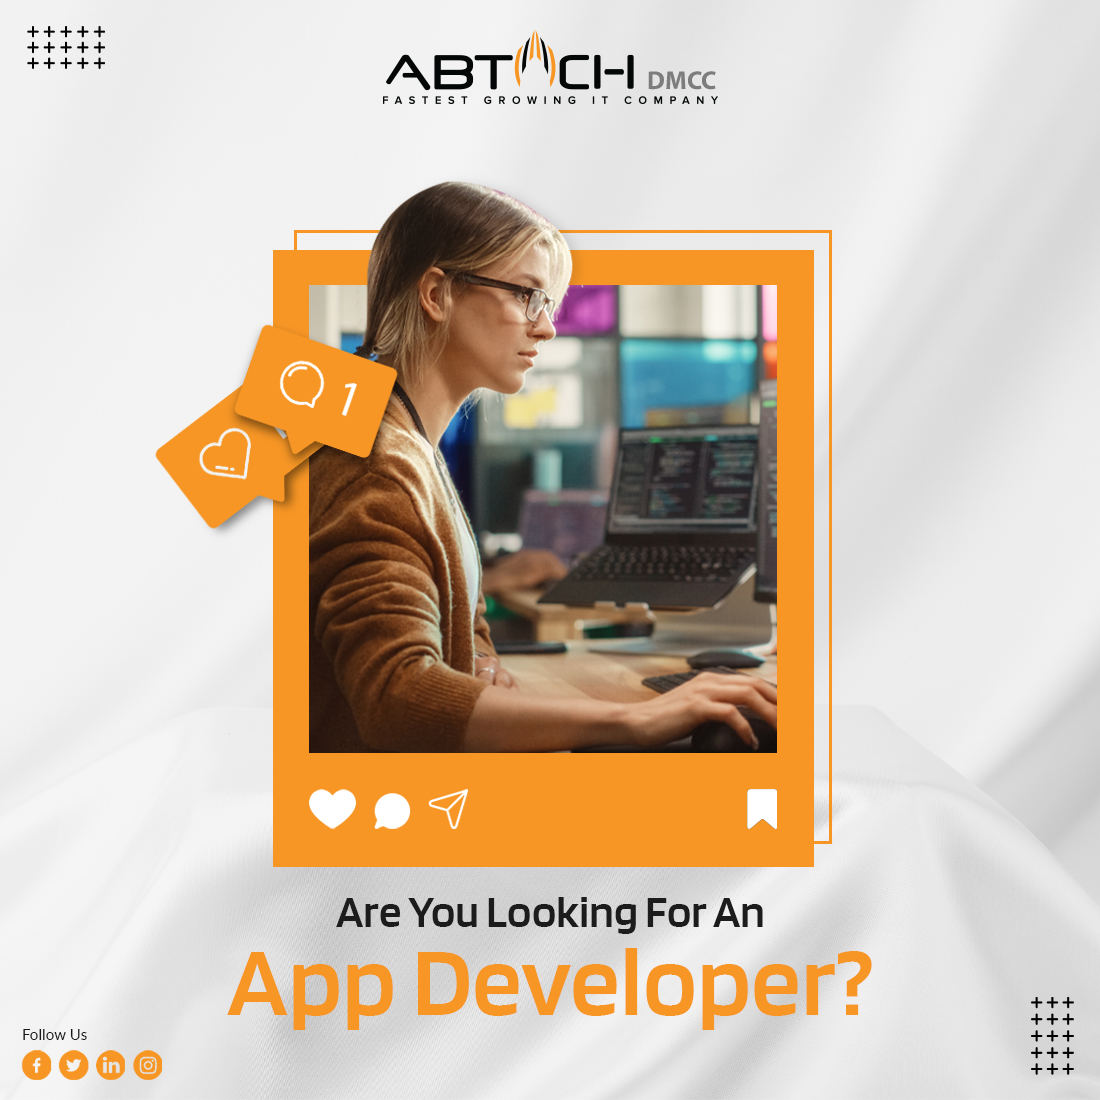 Your app development project is only as good as the idea rooting from it. As a result, it is essential to choose the right team for your project.

#AbtachDMCC #mobileappdevelopment #appdevelopment #appdesign #applicationmobile #webapplication #websitedesign #websitedesigner